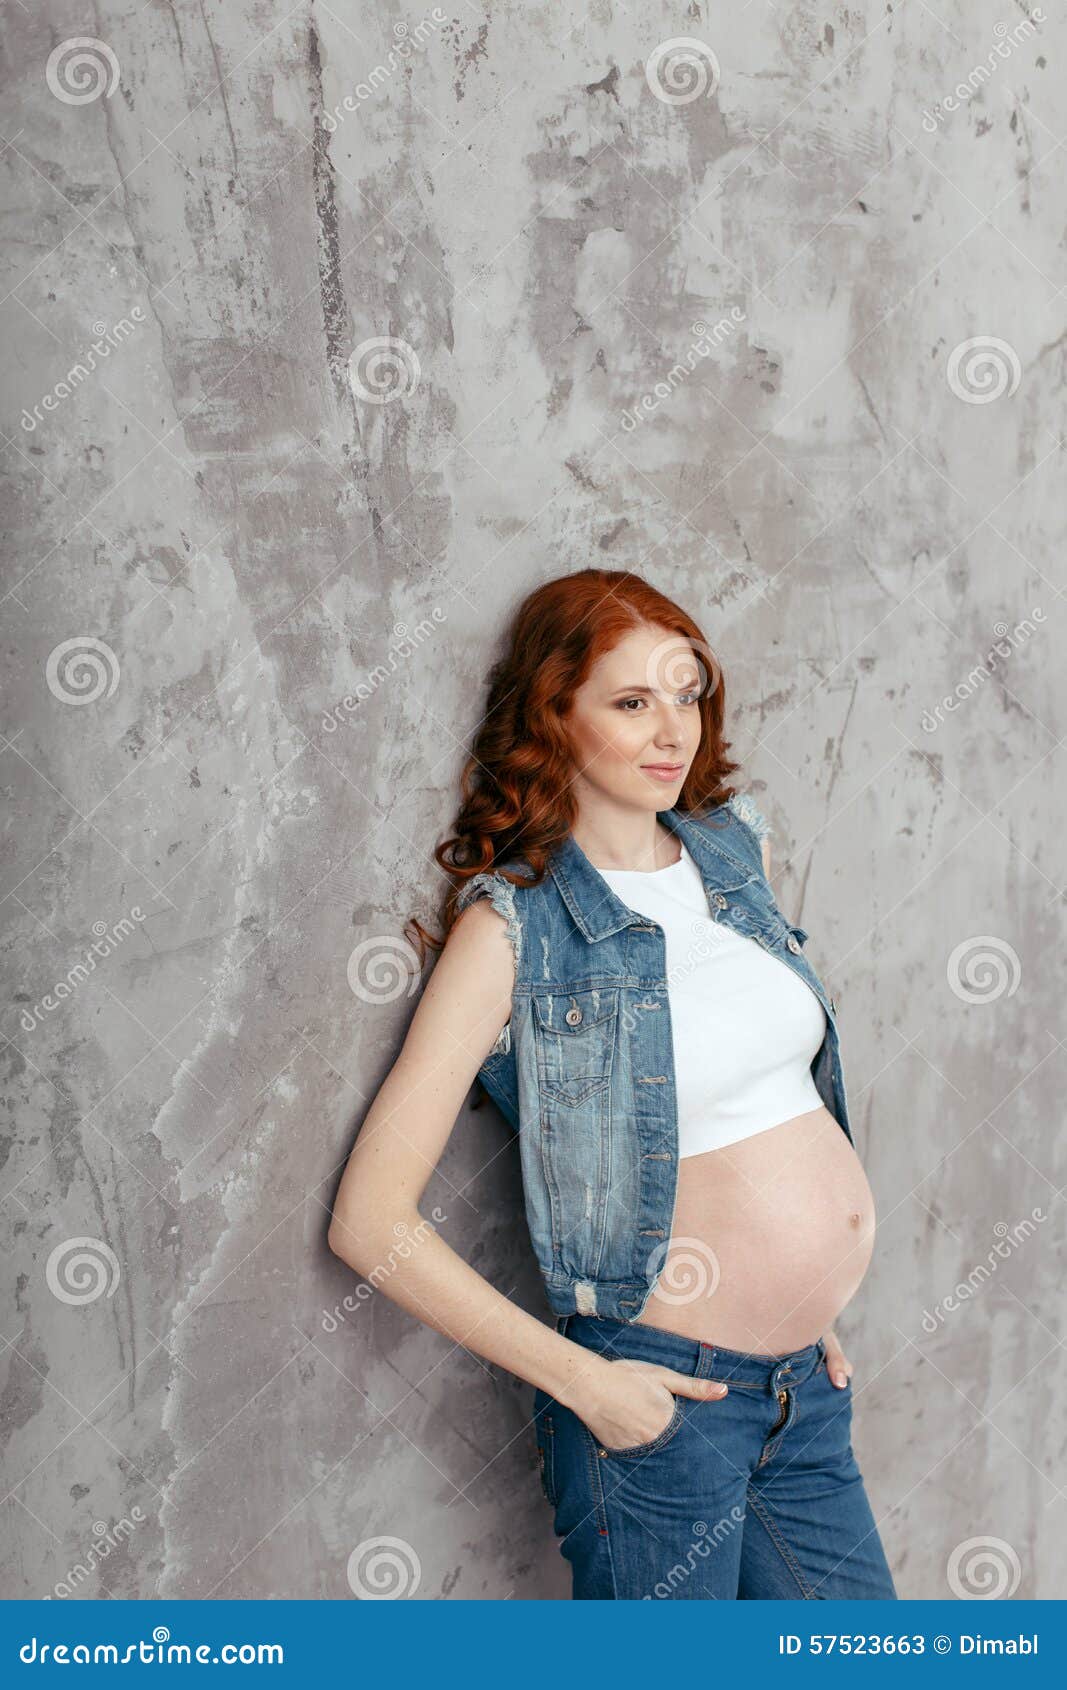 Sexy Young Pregnant